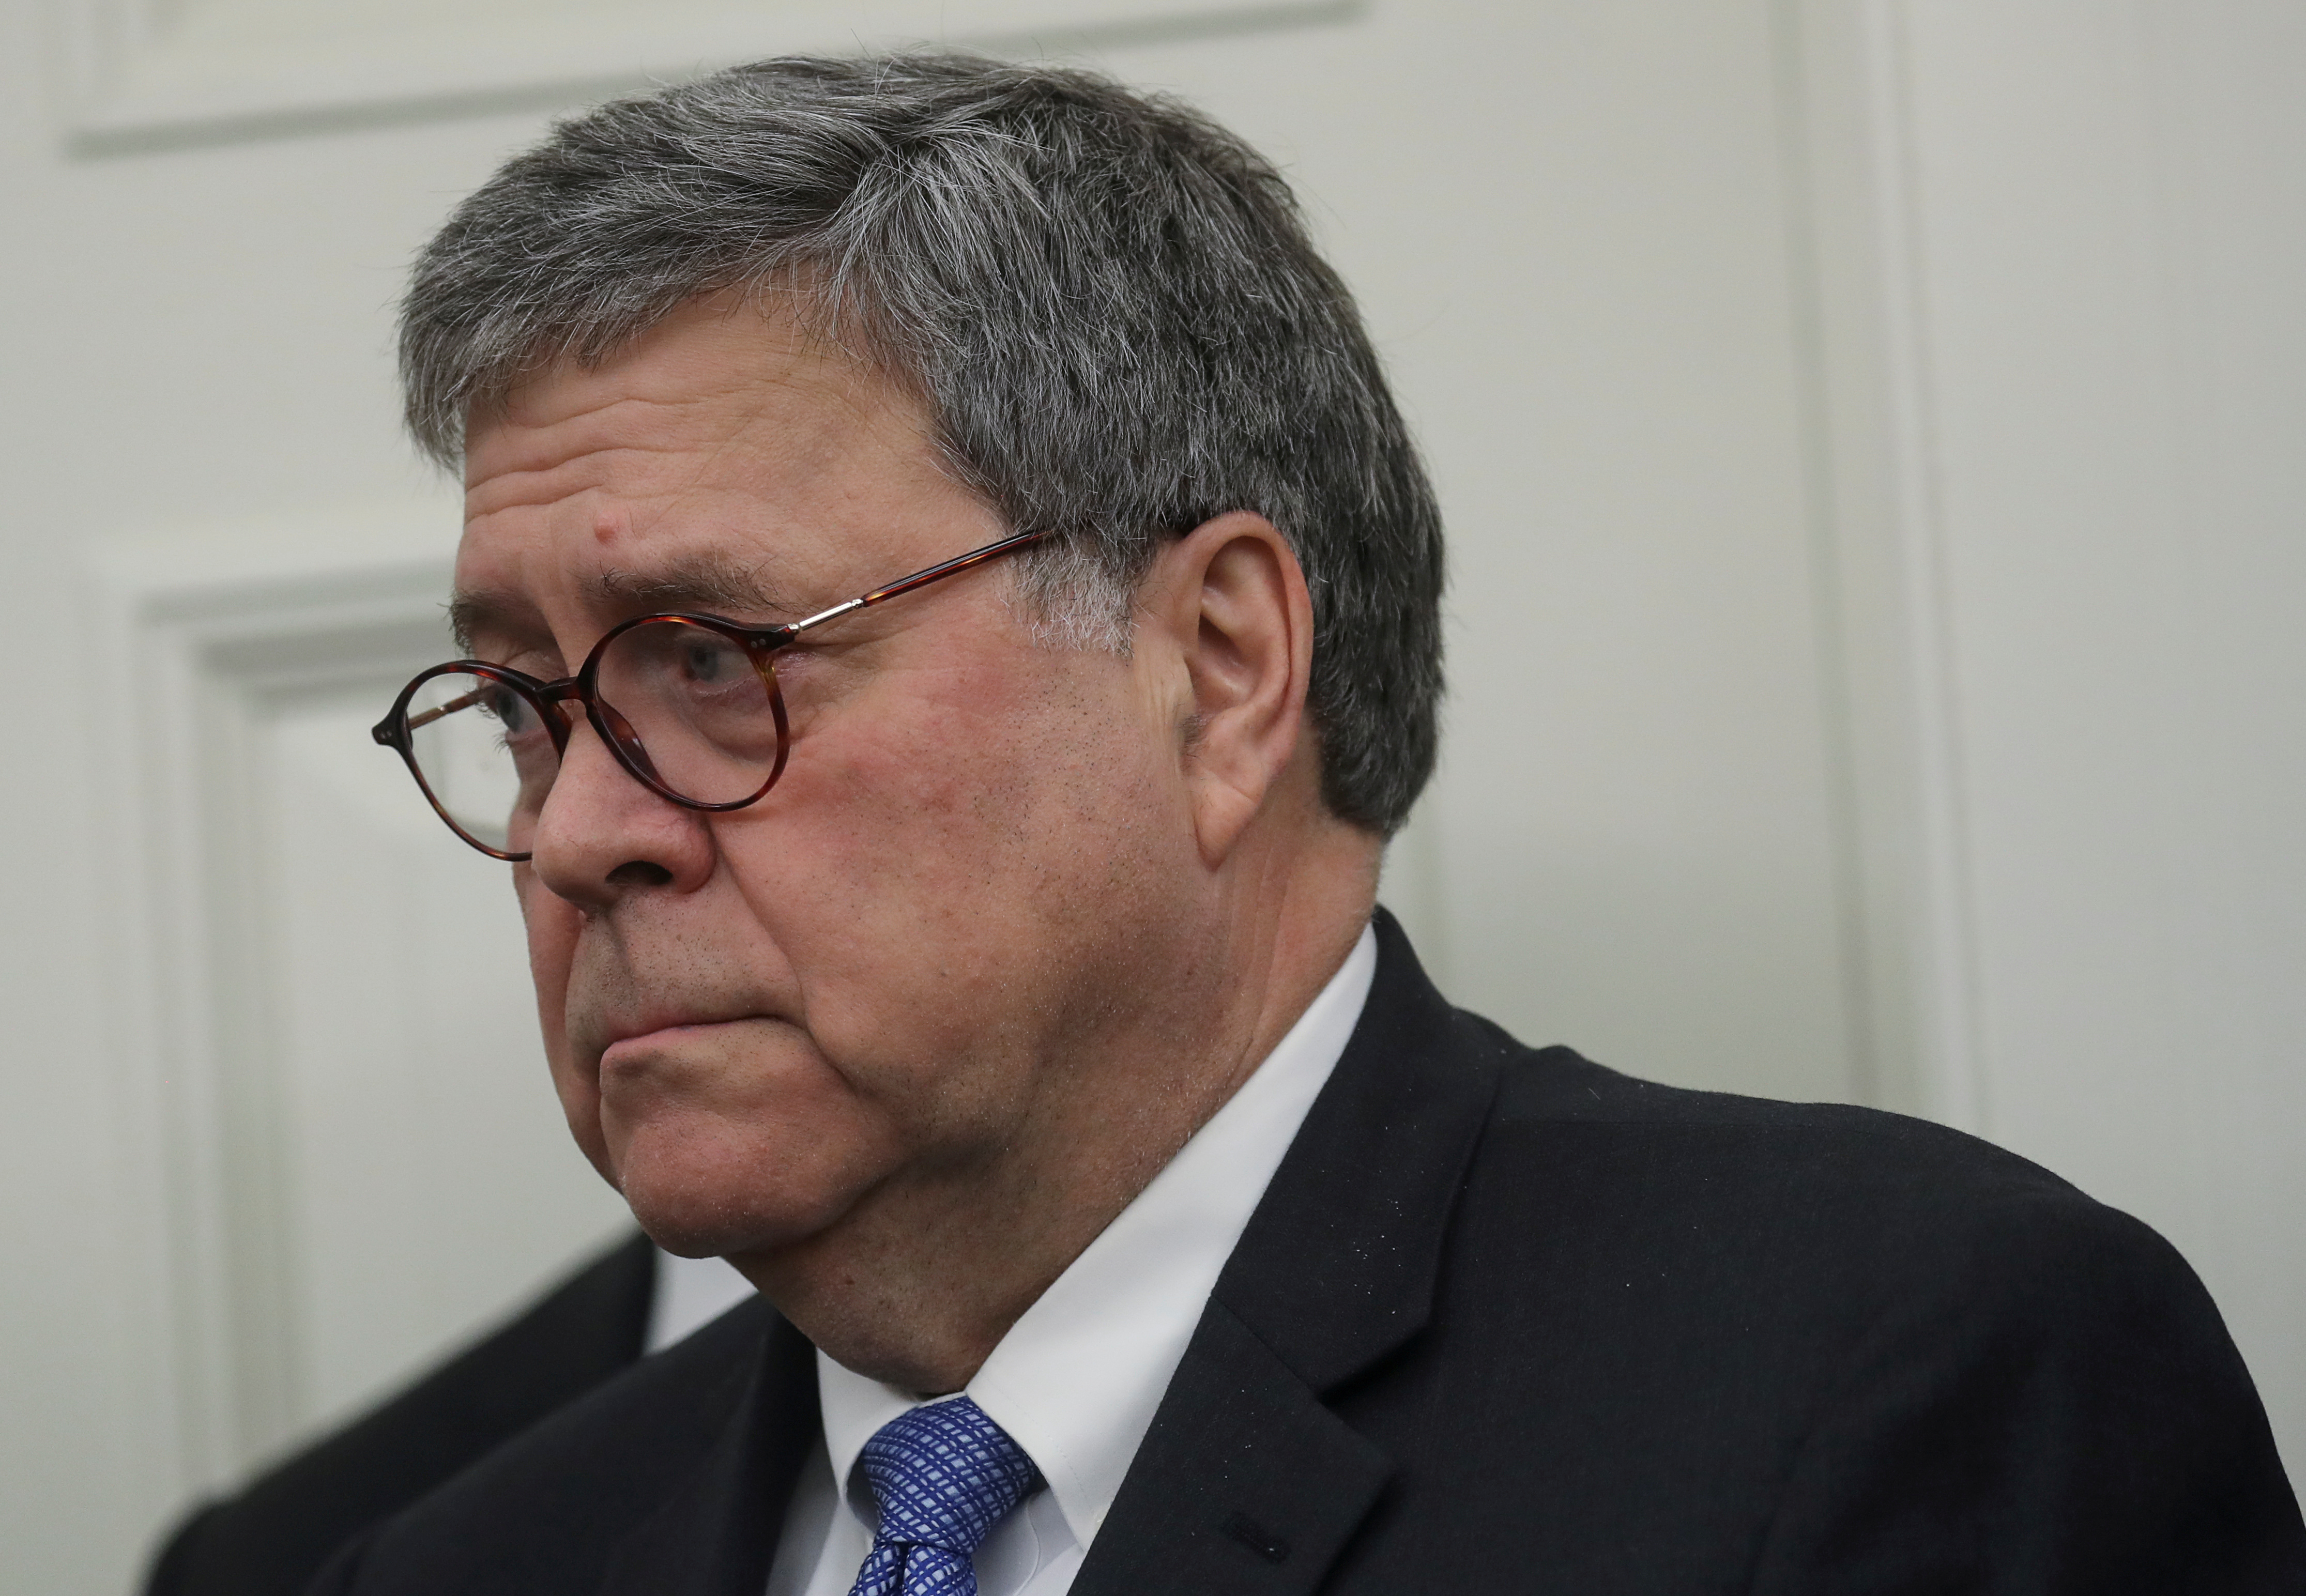 FILE PHOTO: U.S. Attorney General William Barr attends a Presidential Medal of Freedom ceremony in honor of former Attorney General Edwin Meese in the Oval Office of the White House in Washington, October 8, 2019. REUTERS/Leah Millis/File Photo 